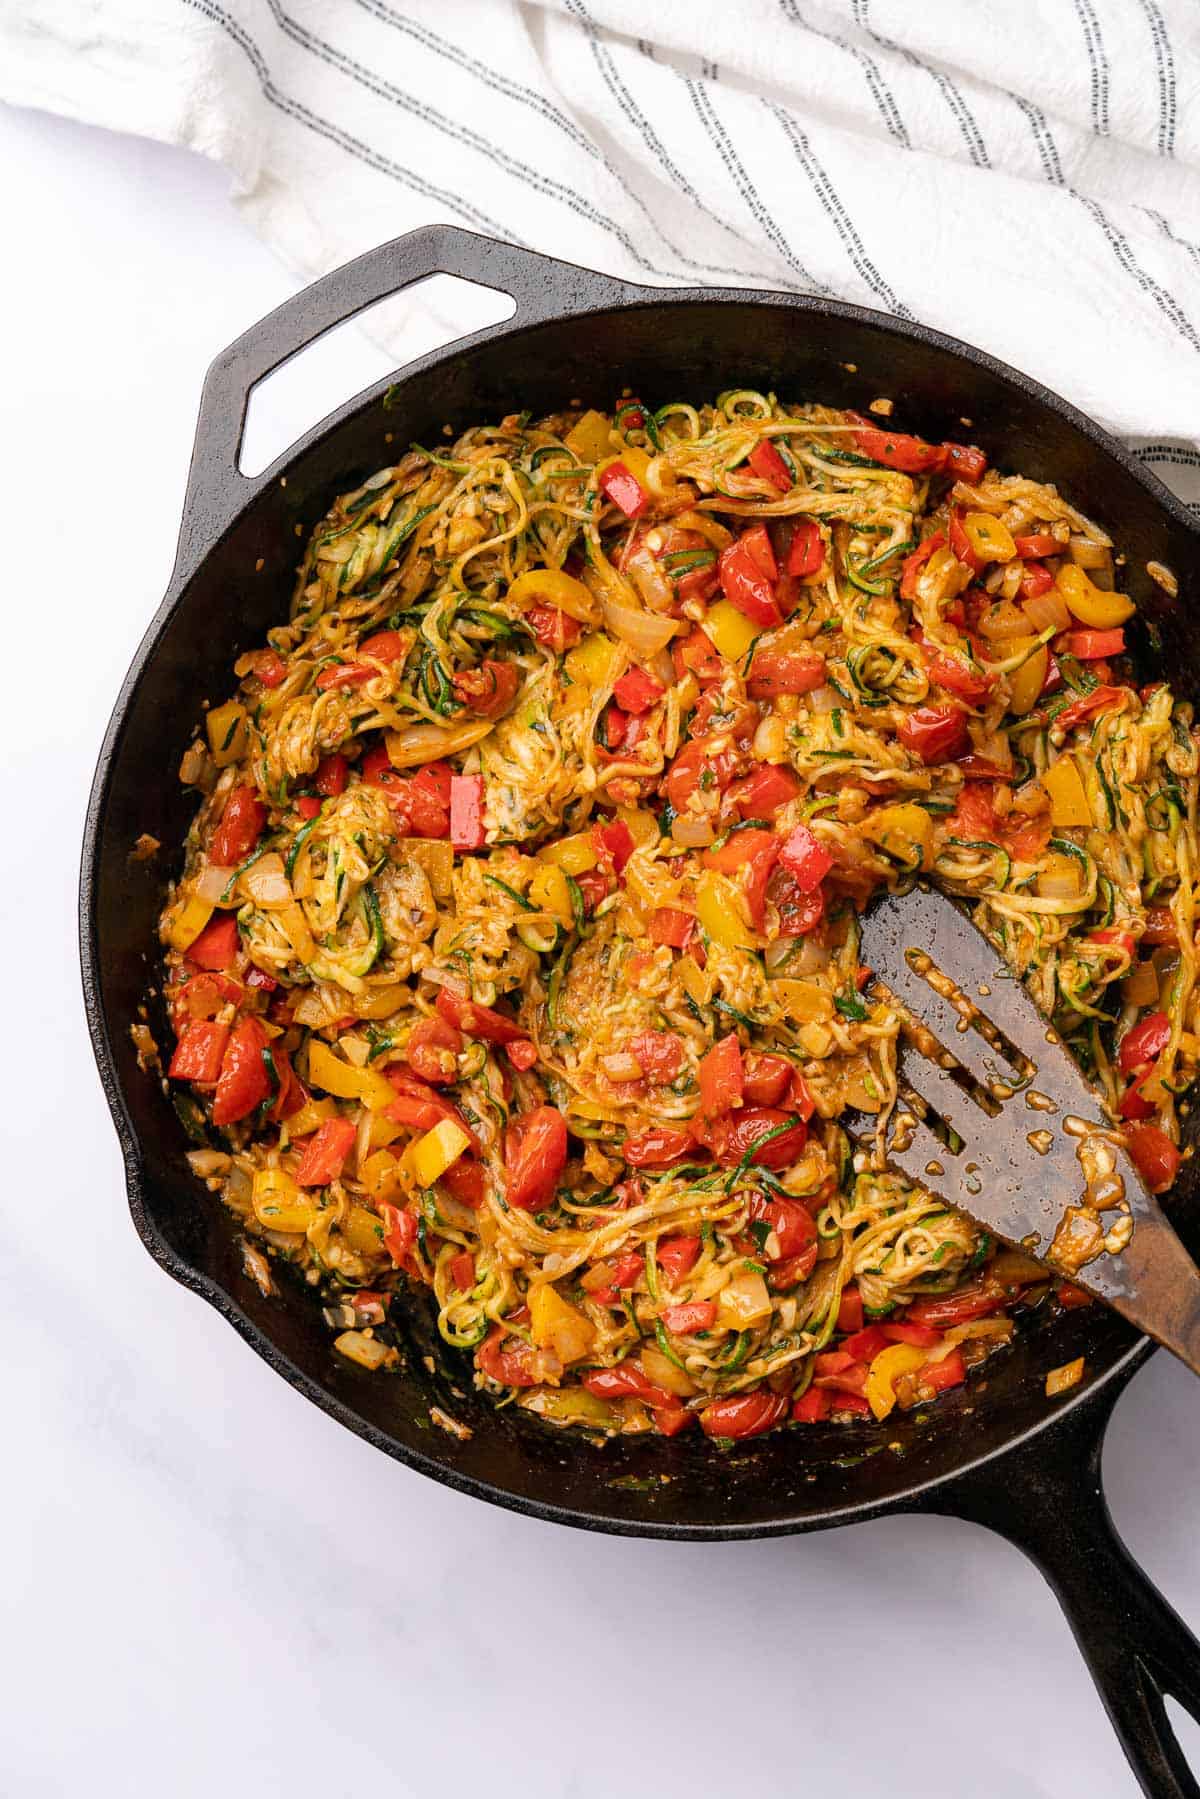 zucchini noodles in a skillet with bell peppers, tomatoes and onions